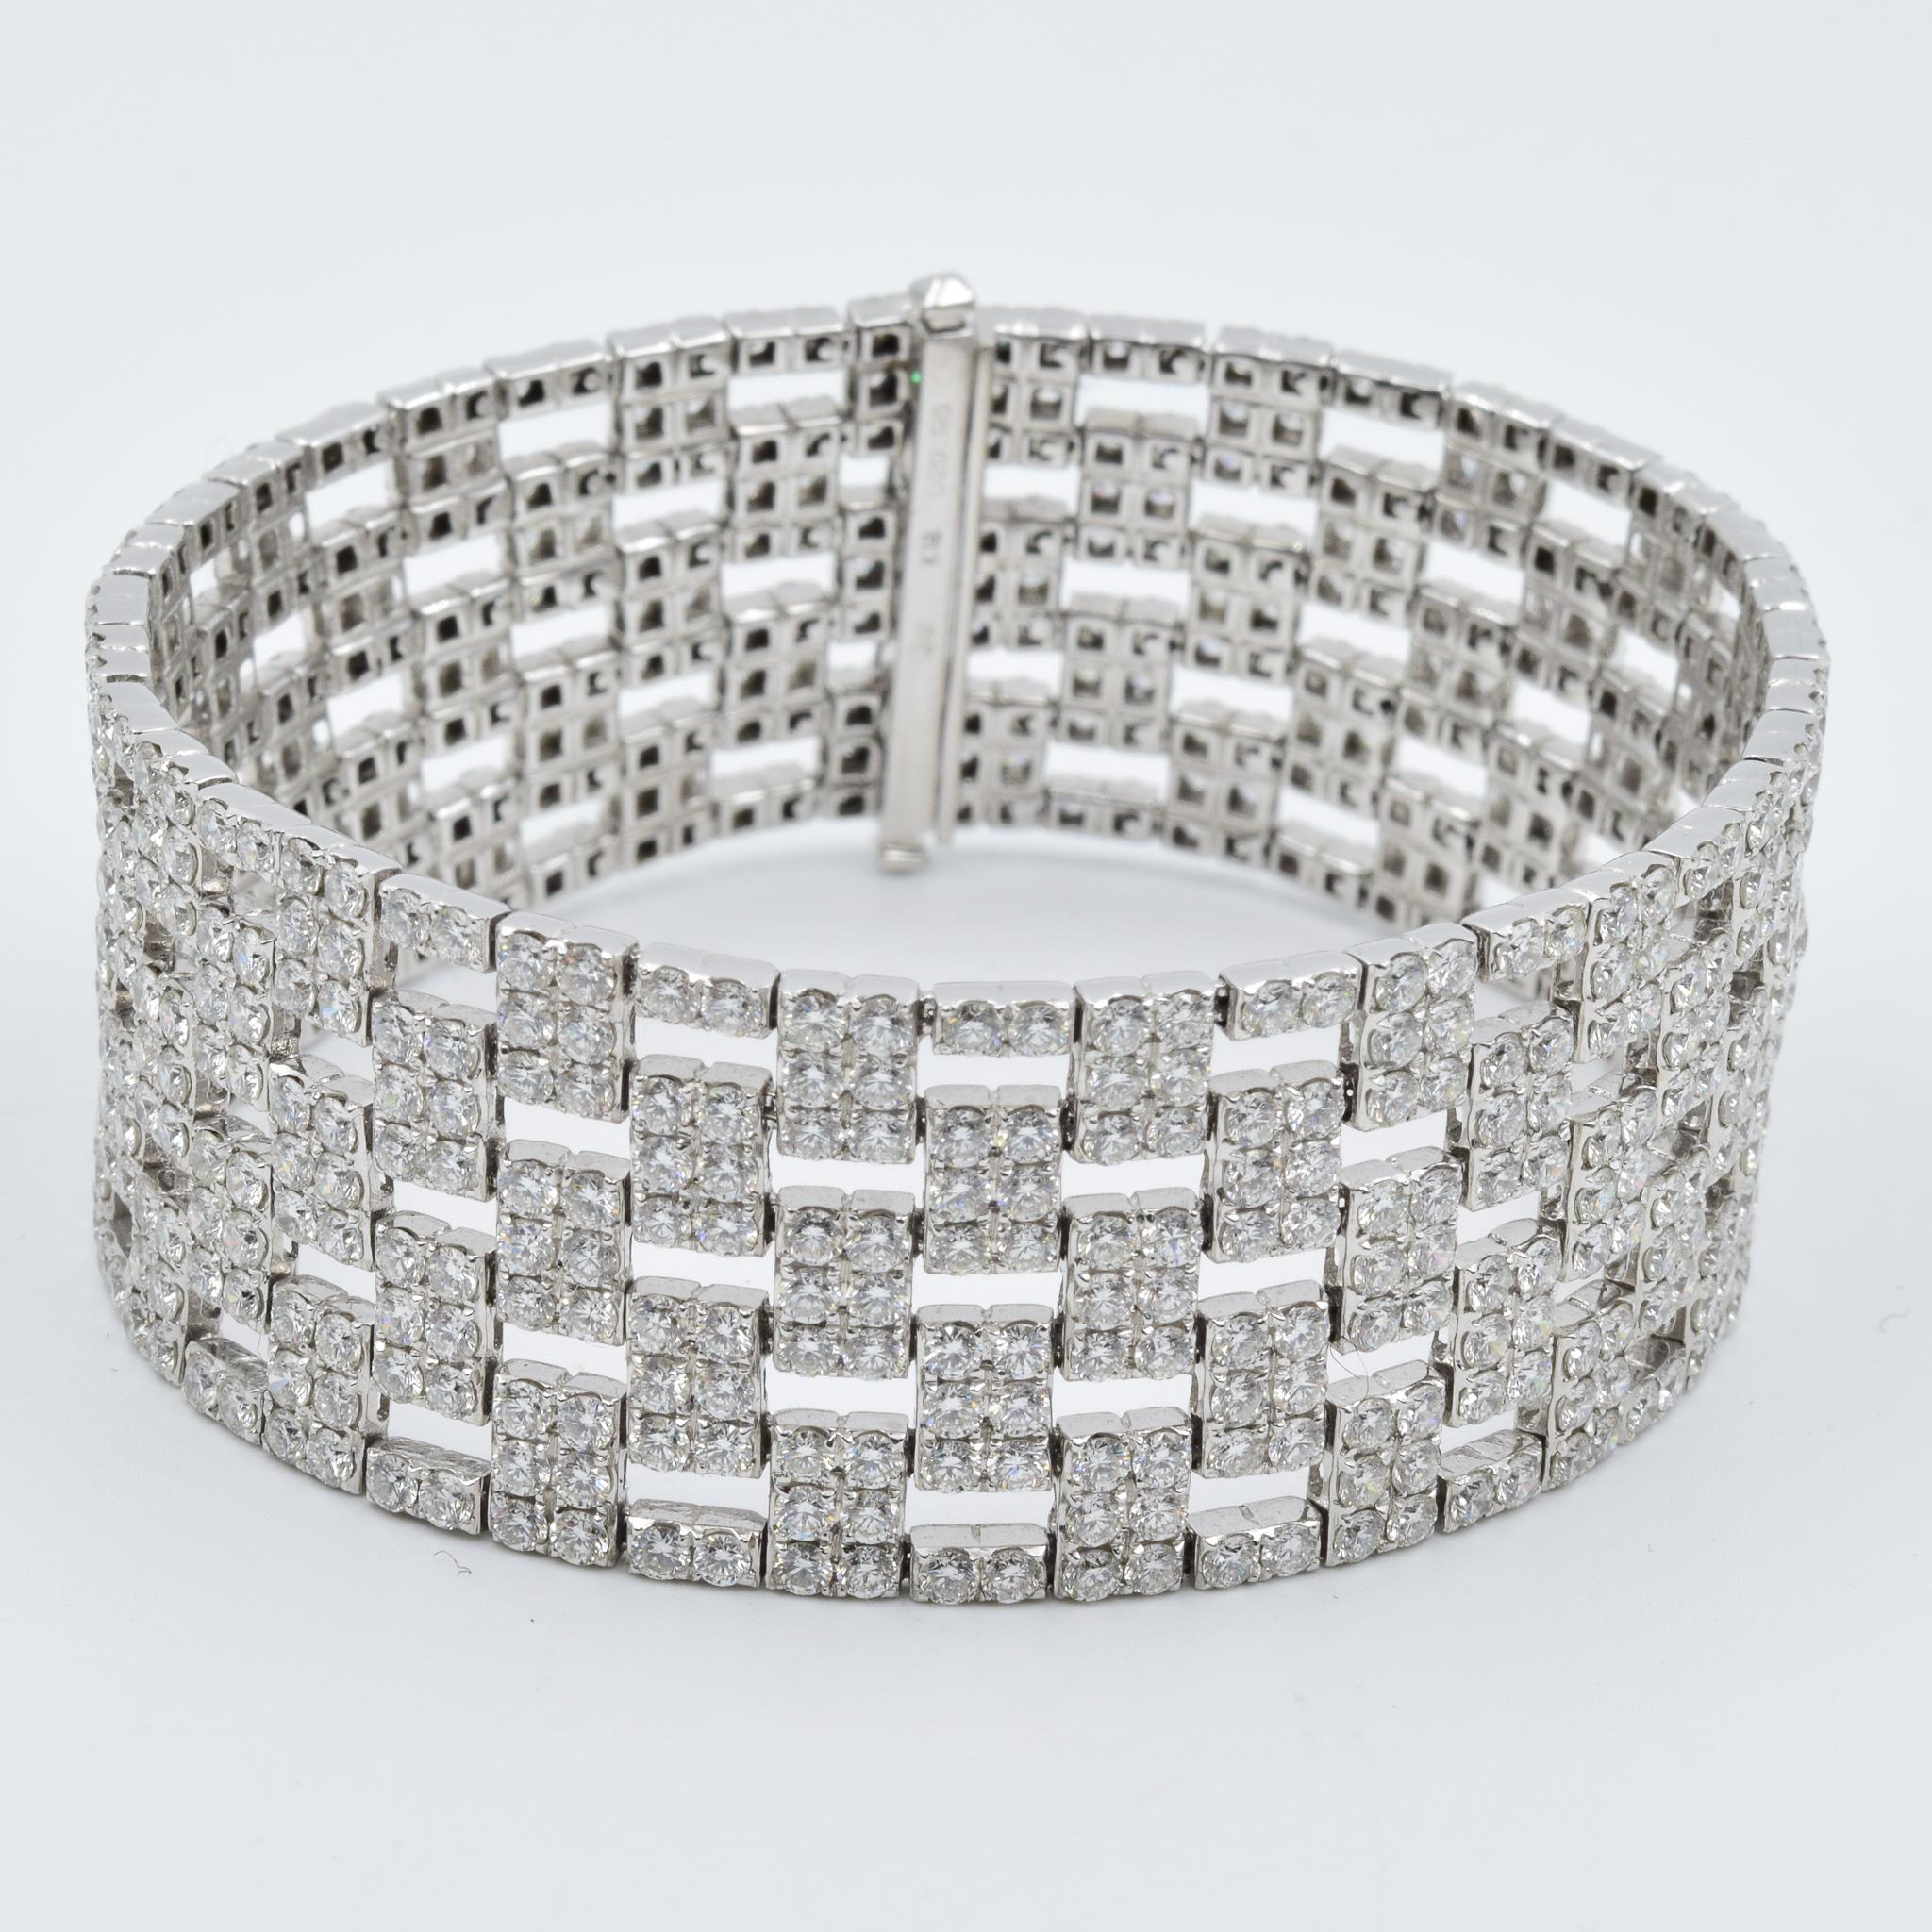 This beautiful bracelet has nearly 21 carats of pave set diamonds set in this unique checkered pattern.  The diamonds are all G color VS clarity in range.  This bracelet is brand new and is a retail of $39,900.  Please let us know if you have any